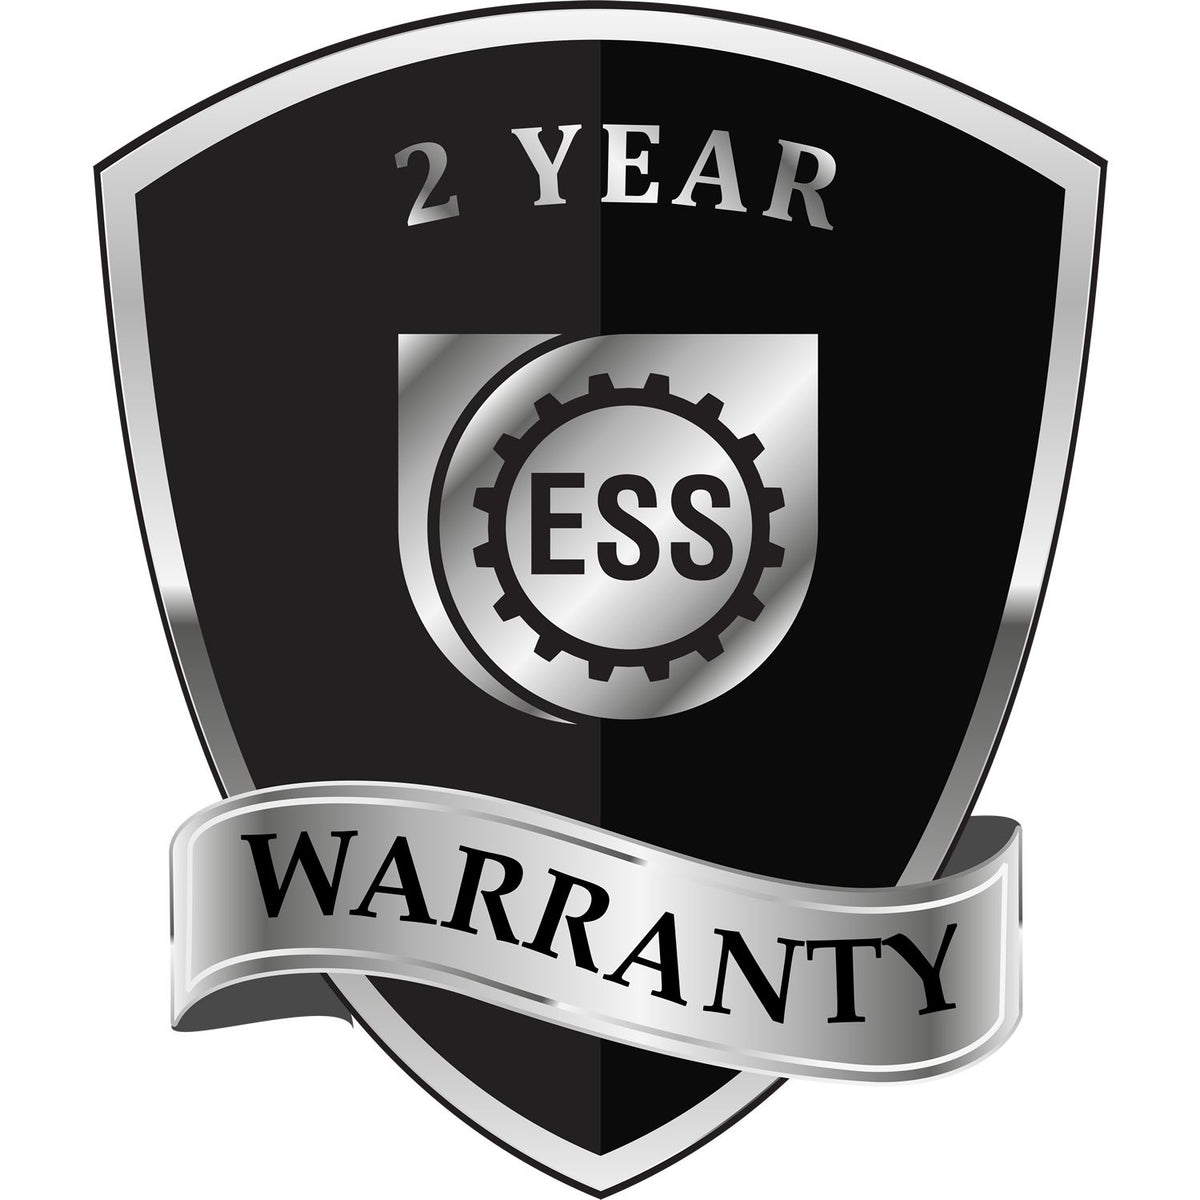 A badge or emblem showing a warranty icon for the Heavy Duty Cast Iron Minnesota Land Surveyor Seal Embosser